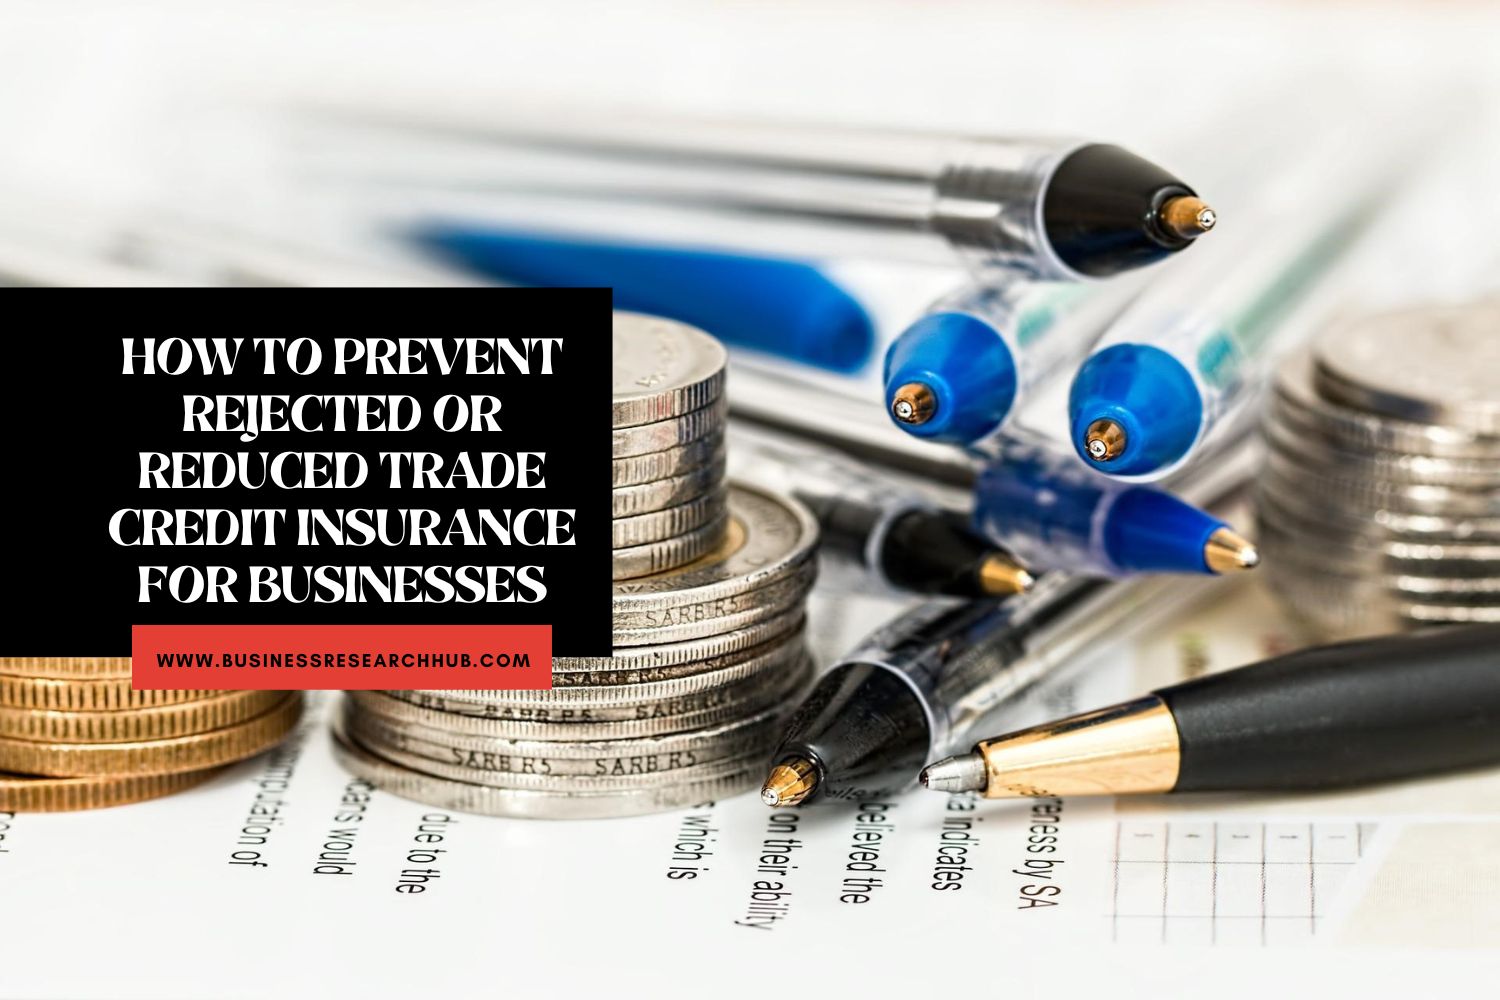 How-To-Prevent-Reduced-Trade-Credit-Insurance-for-Businesses